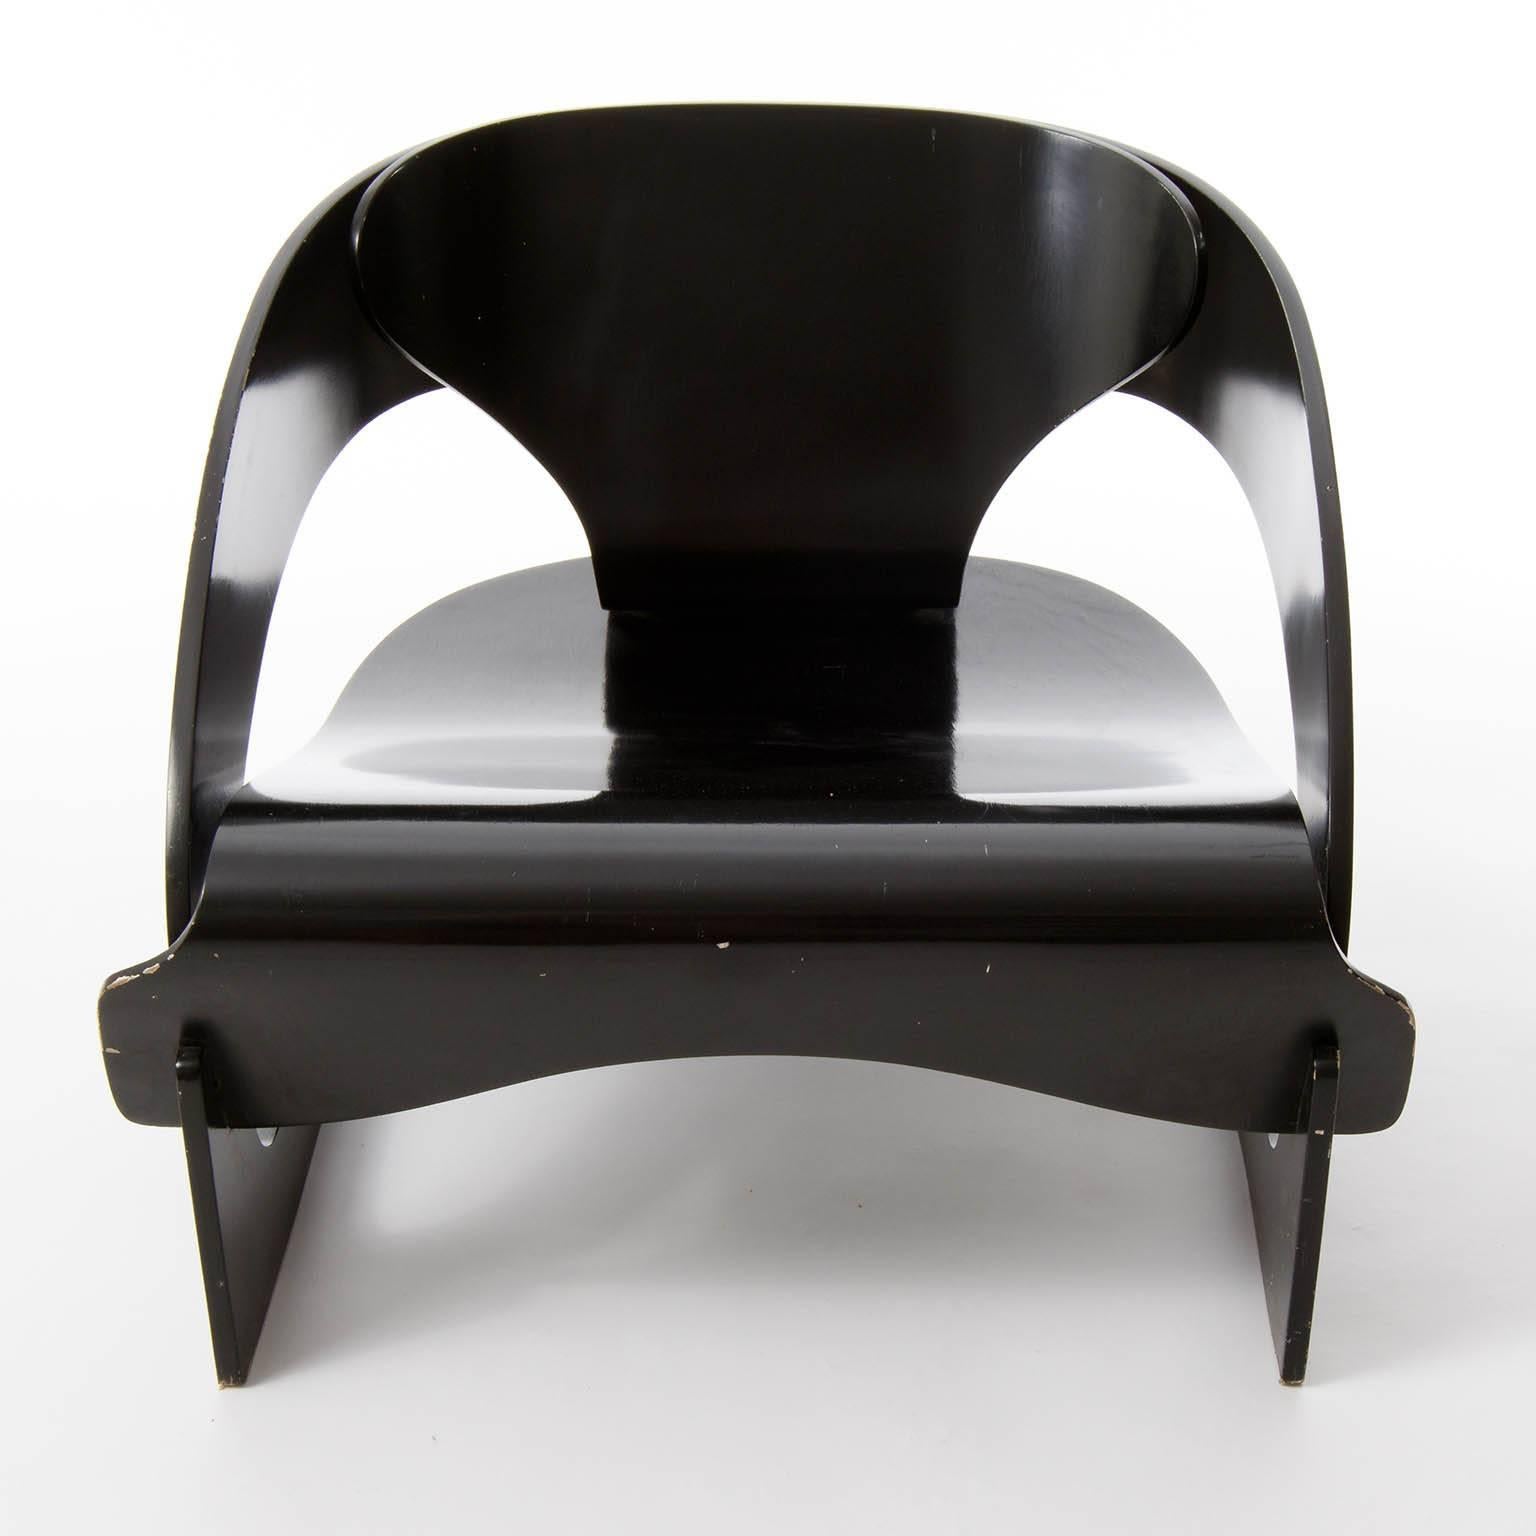 Italian Pair of Joe Colombo Chairs No. 4801, Black Plywood, Kartell, Italy, circa 1963 For Sale